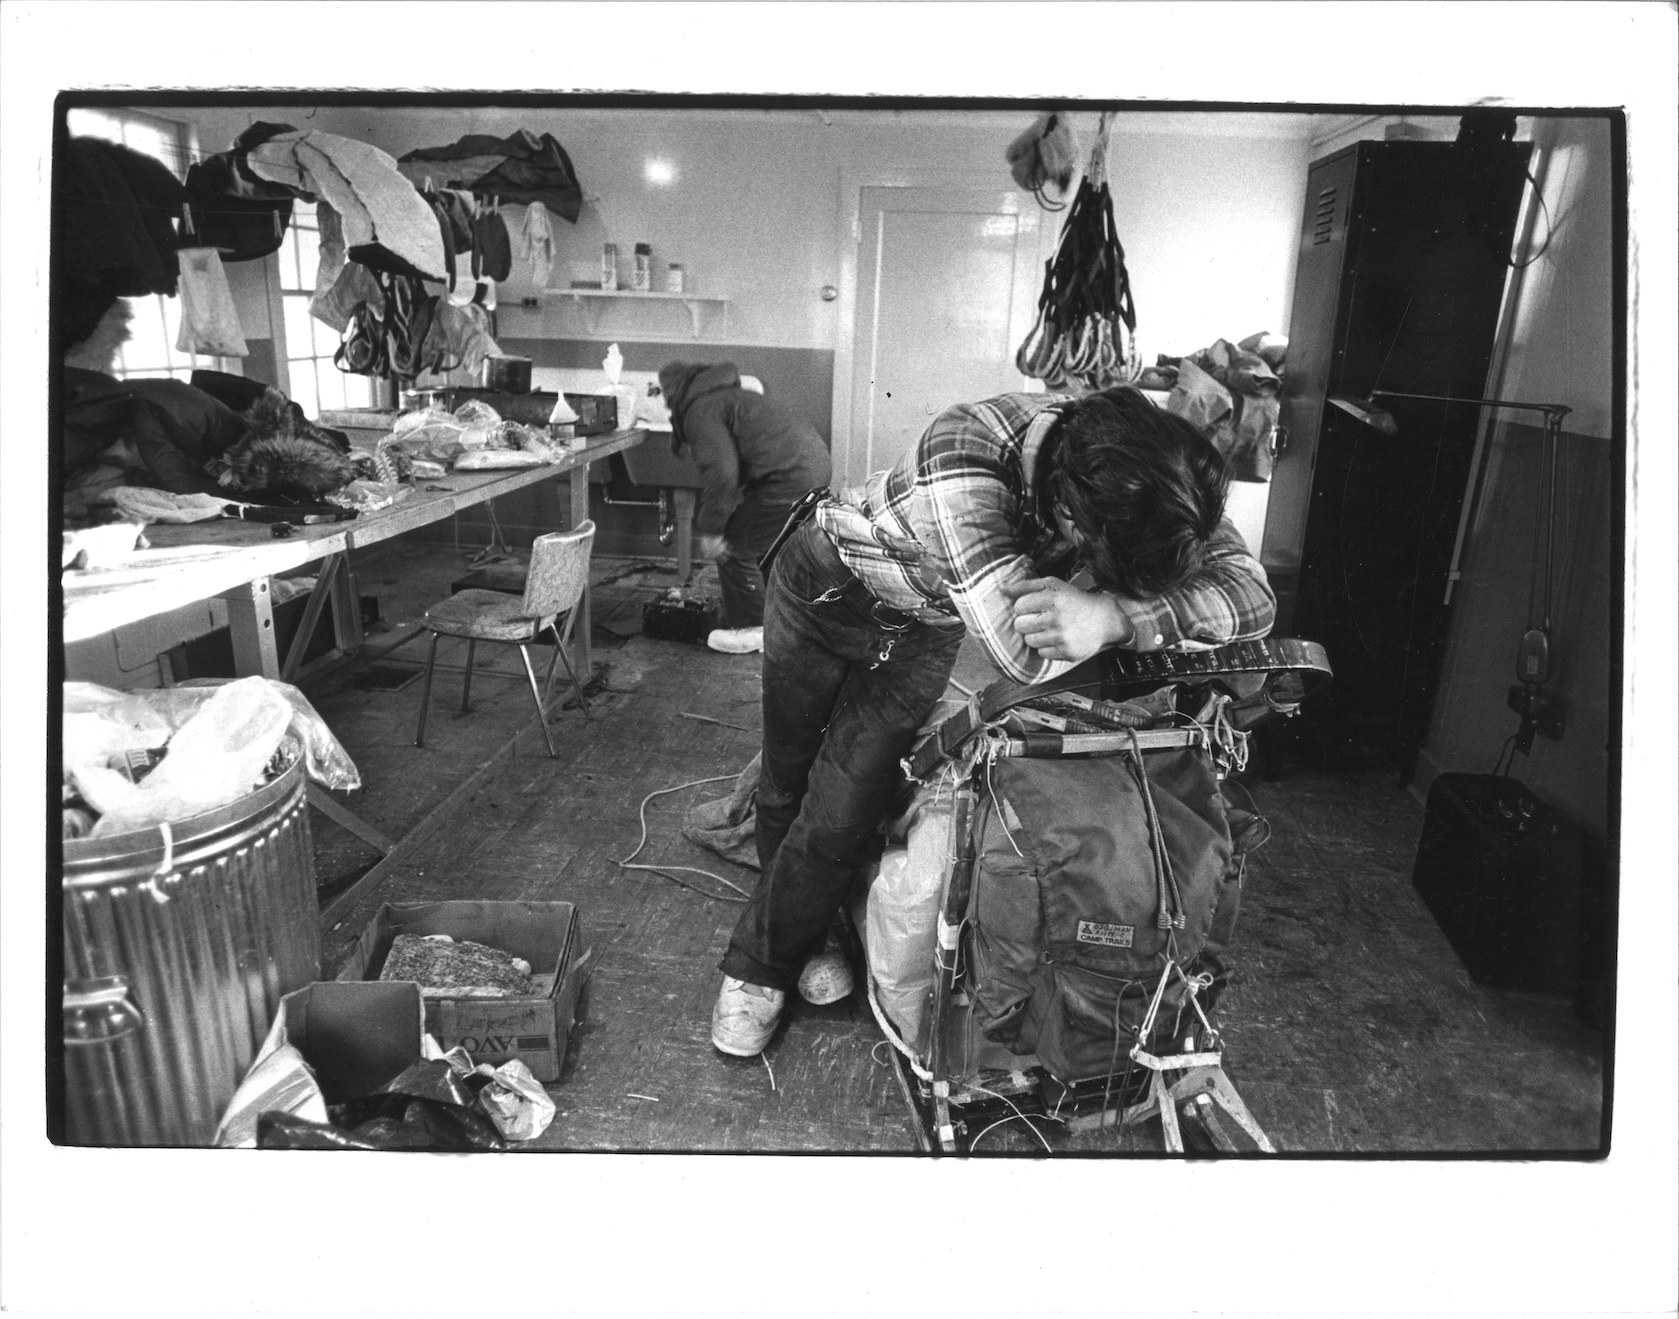 Musher leans on his sled and puts head in his folded arms. The room is strewn with gear. Black and white photo